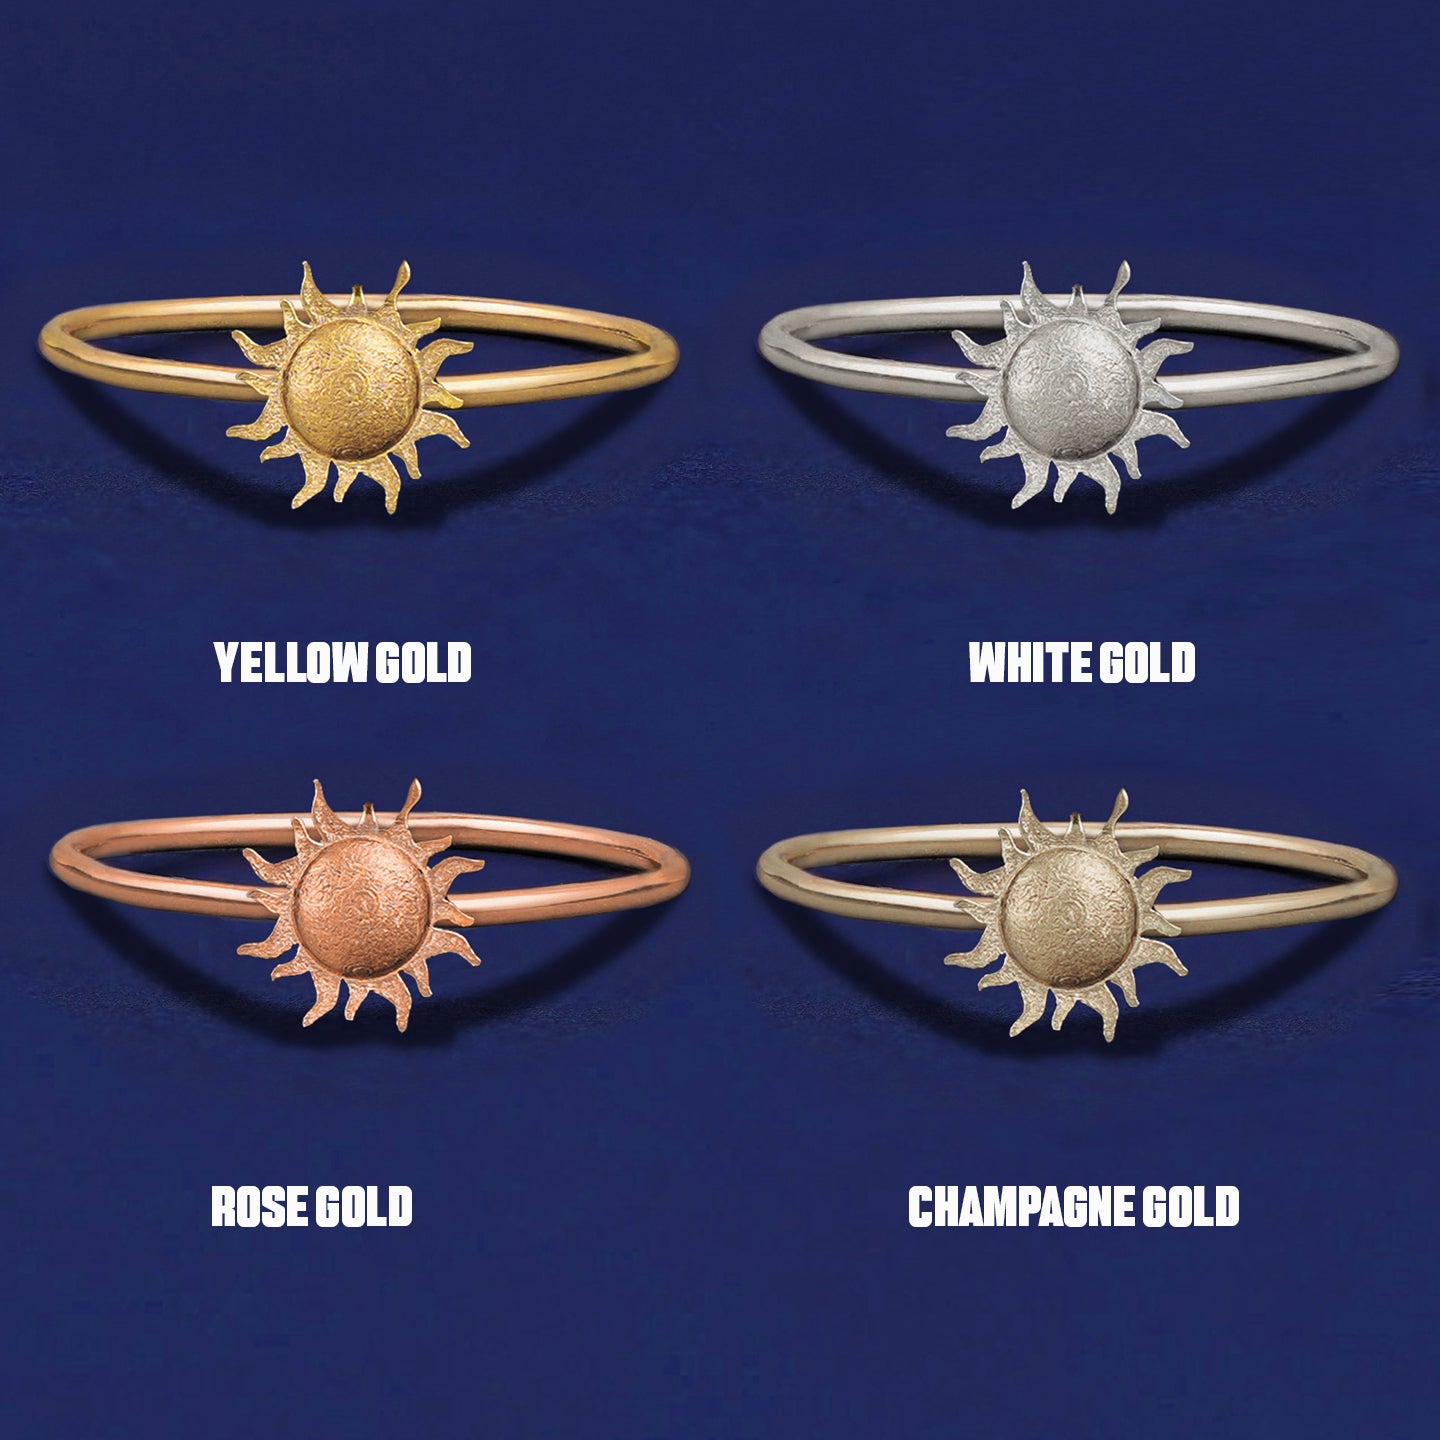 Four versions of the Sun Ring shown in options of yellow, white, rose and champagne gold